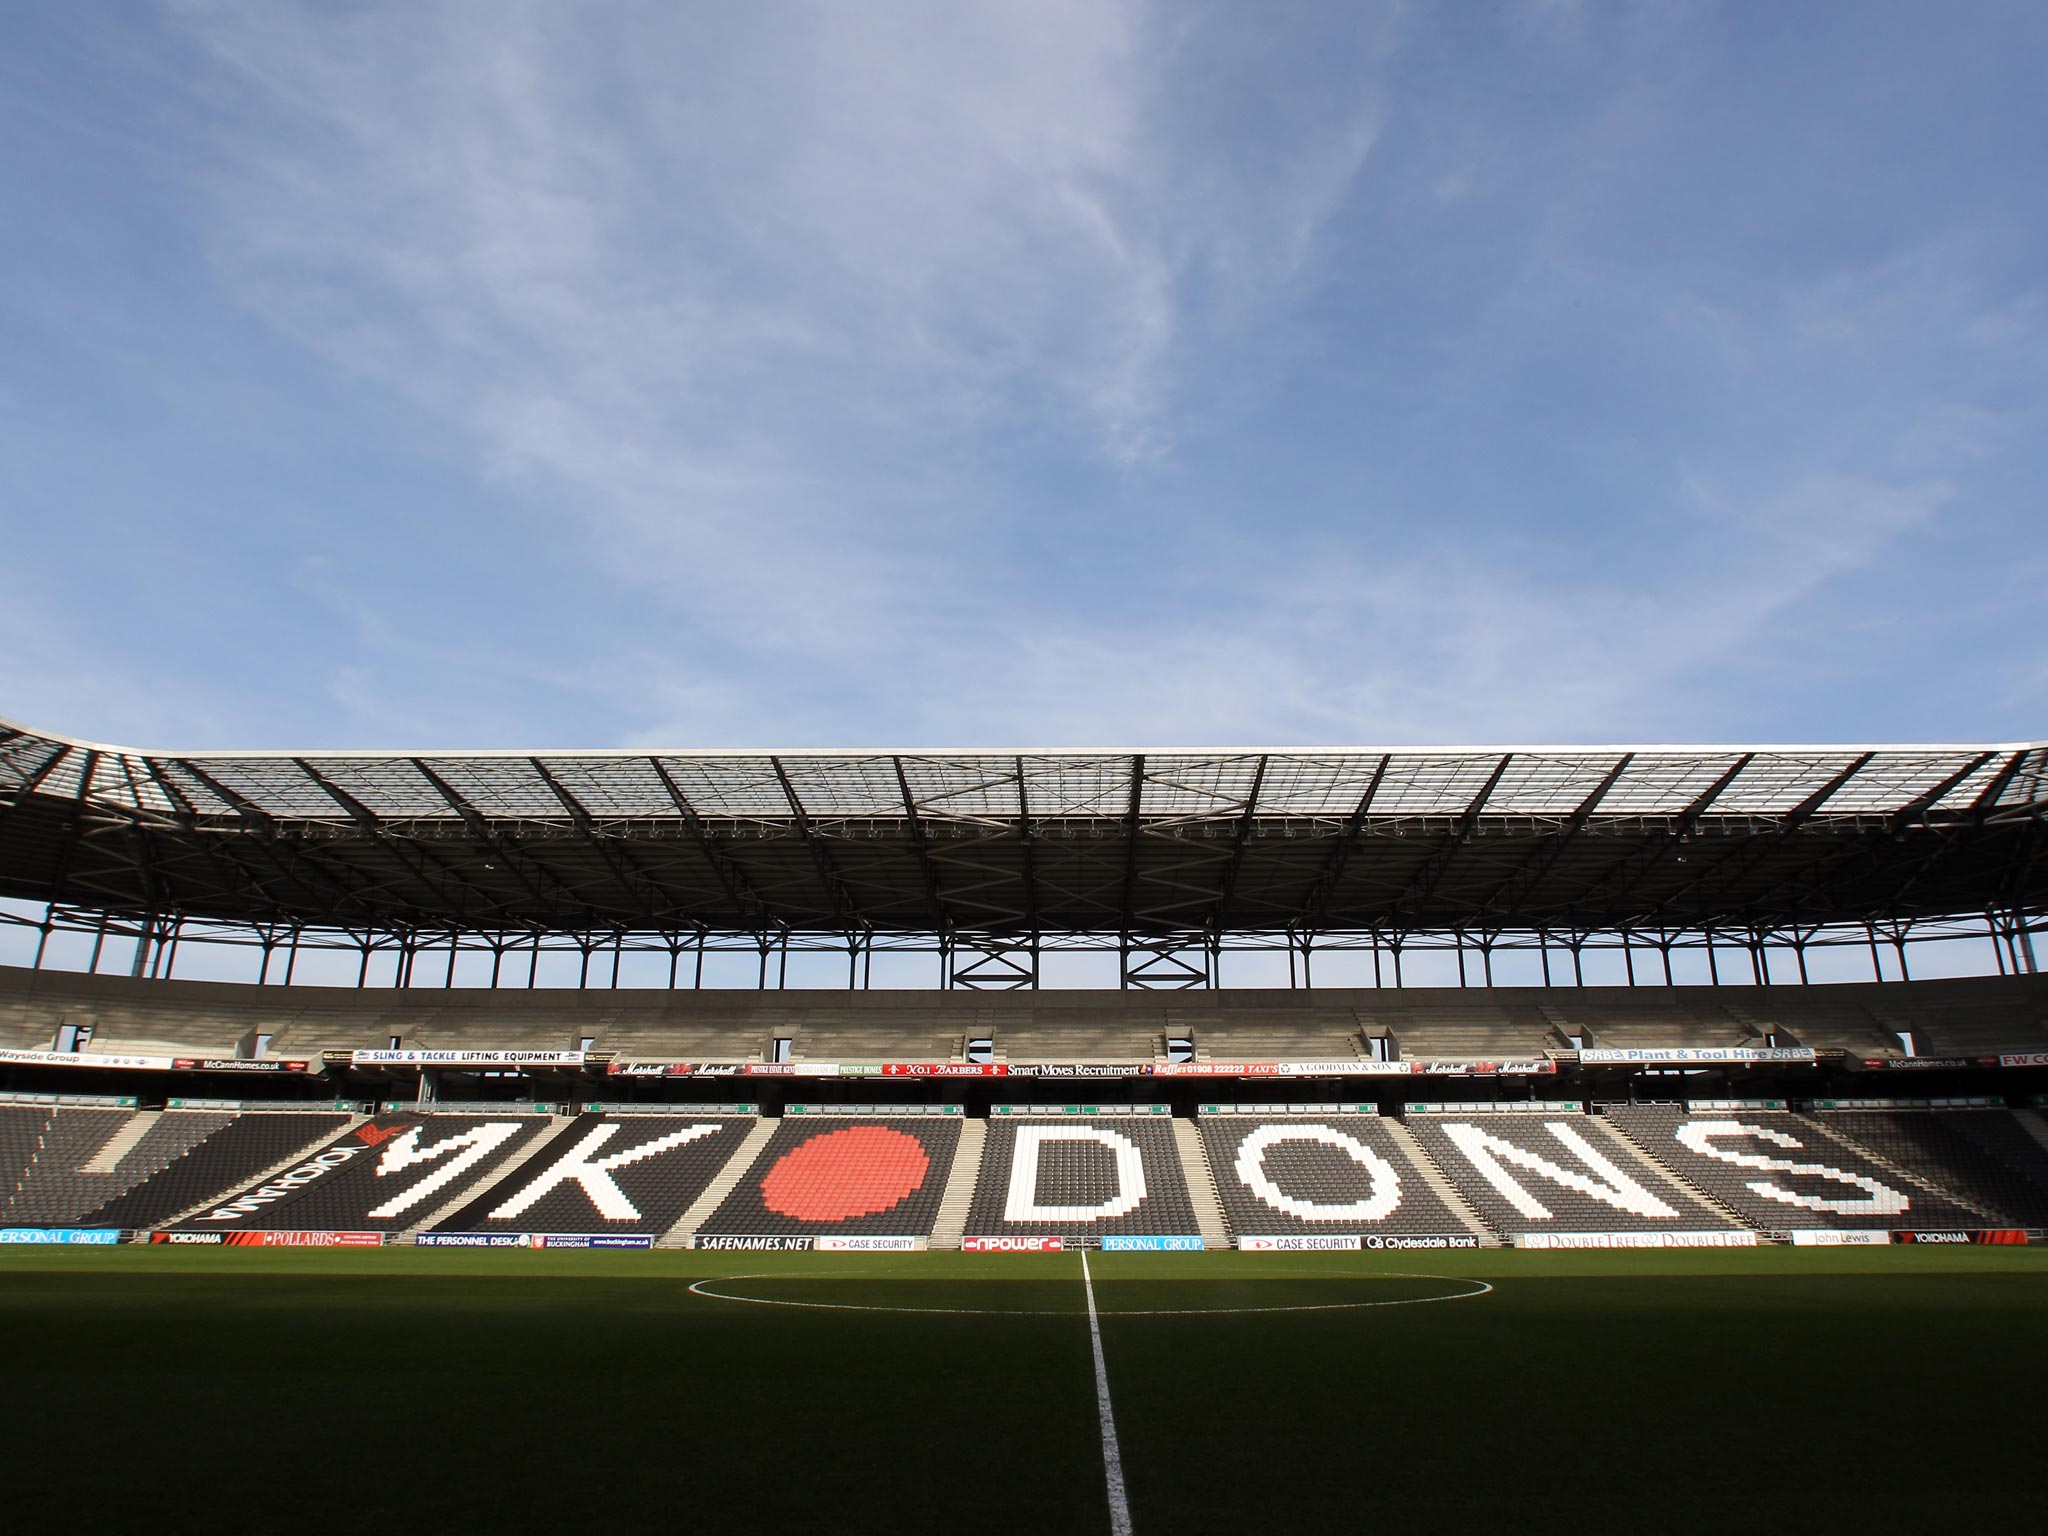 Tottenham could move to the stadiummk in order to redevelop White Hart Lane into a 56,000-seat venue